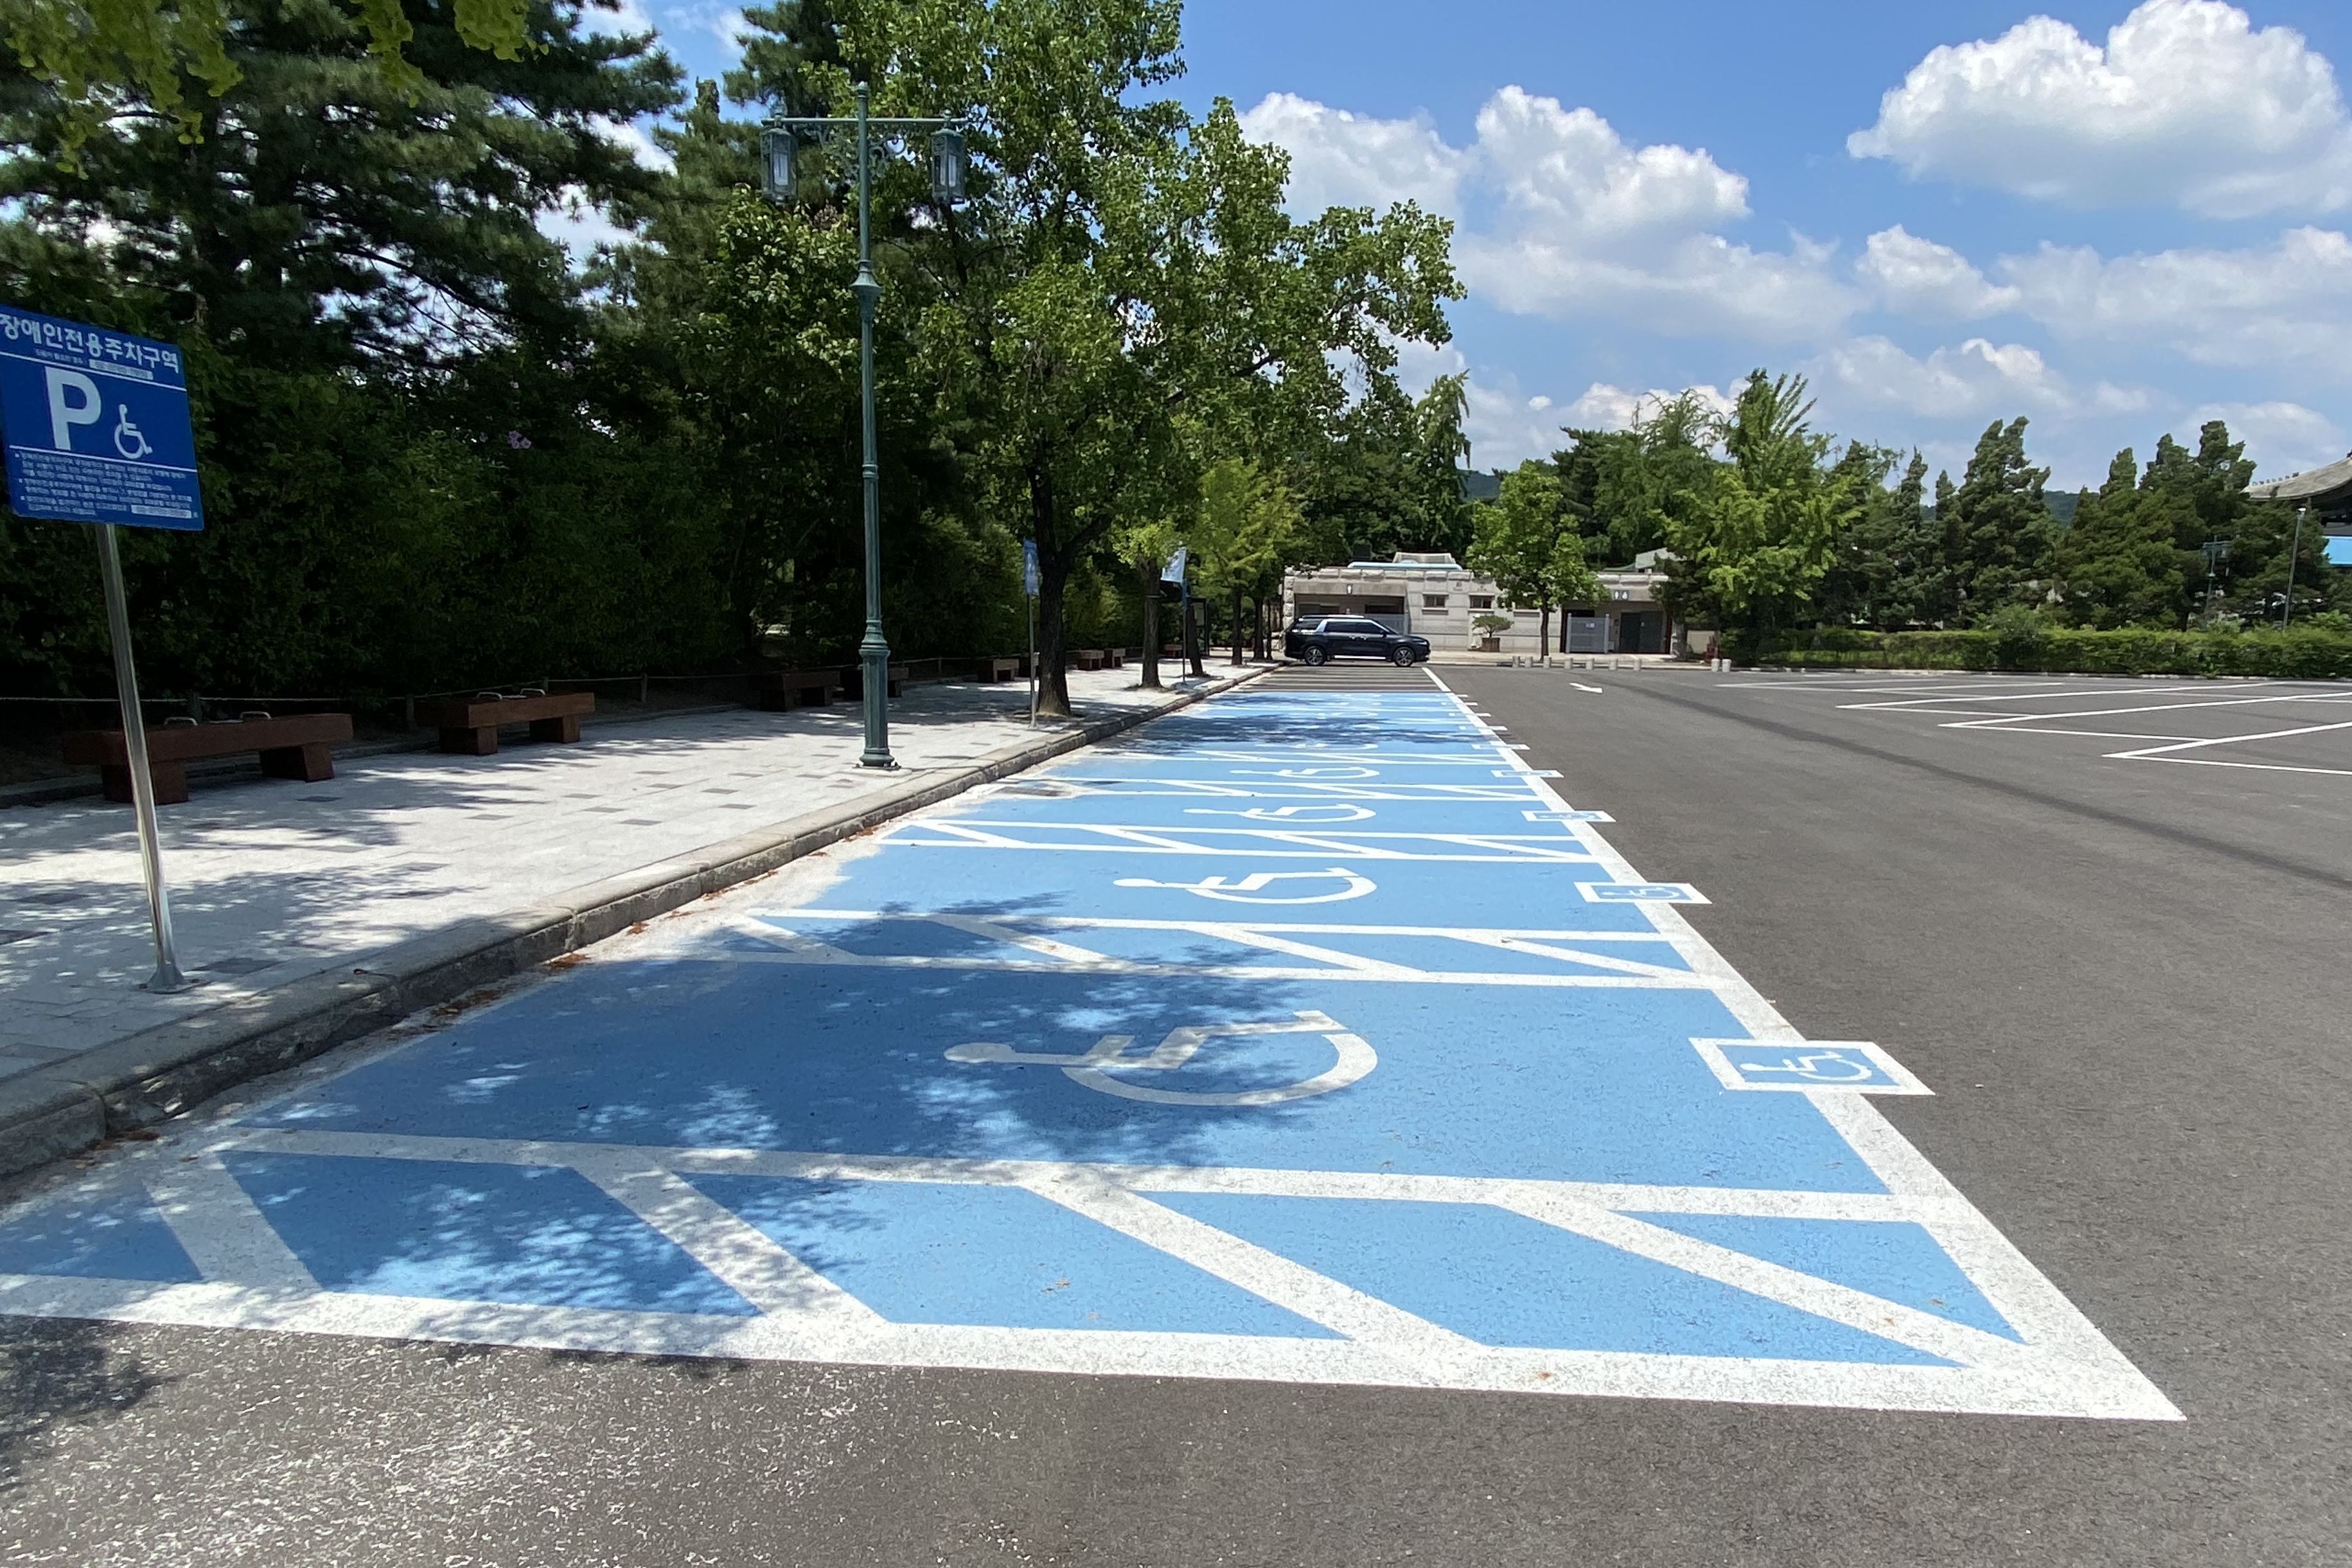 Parking lots0 : Spacious accessible parking lots for wheelchair users
